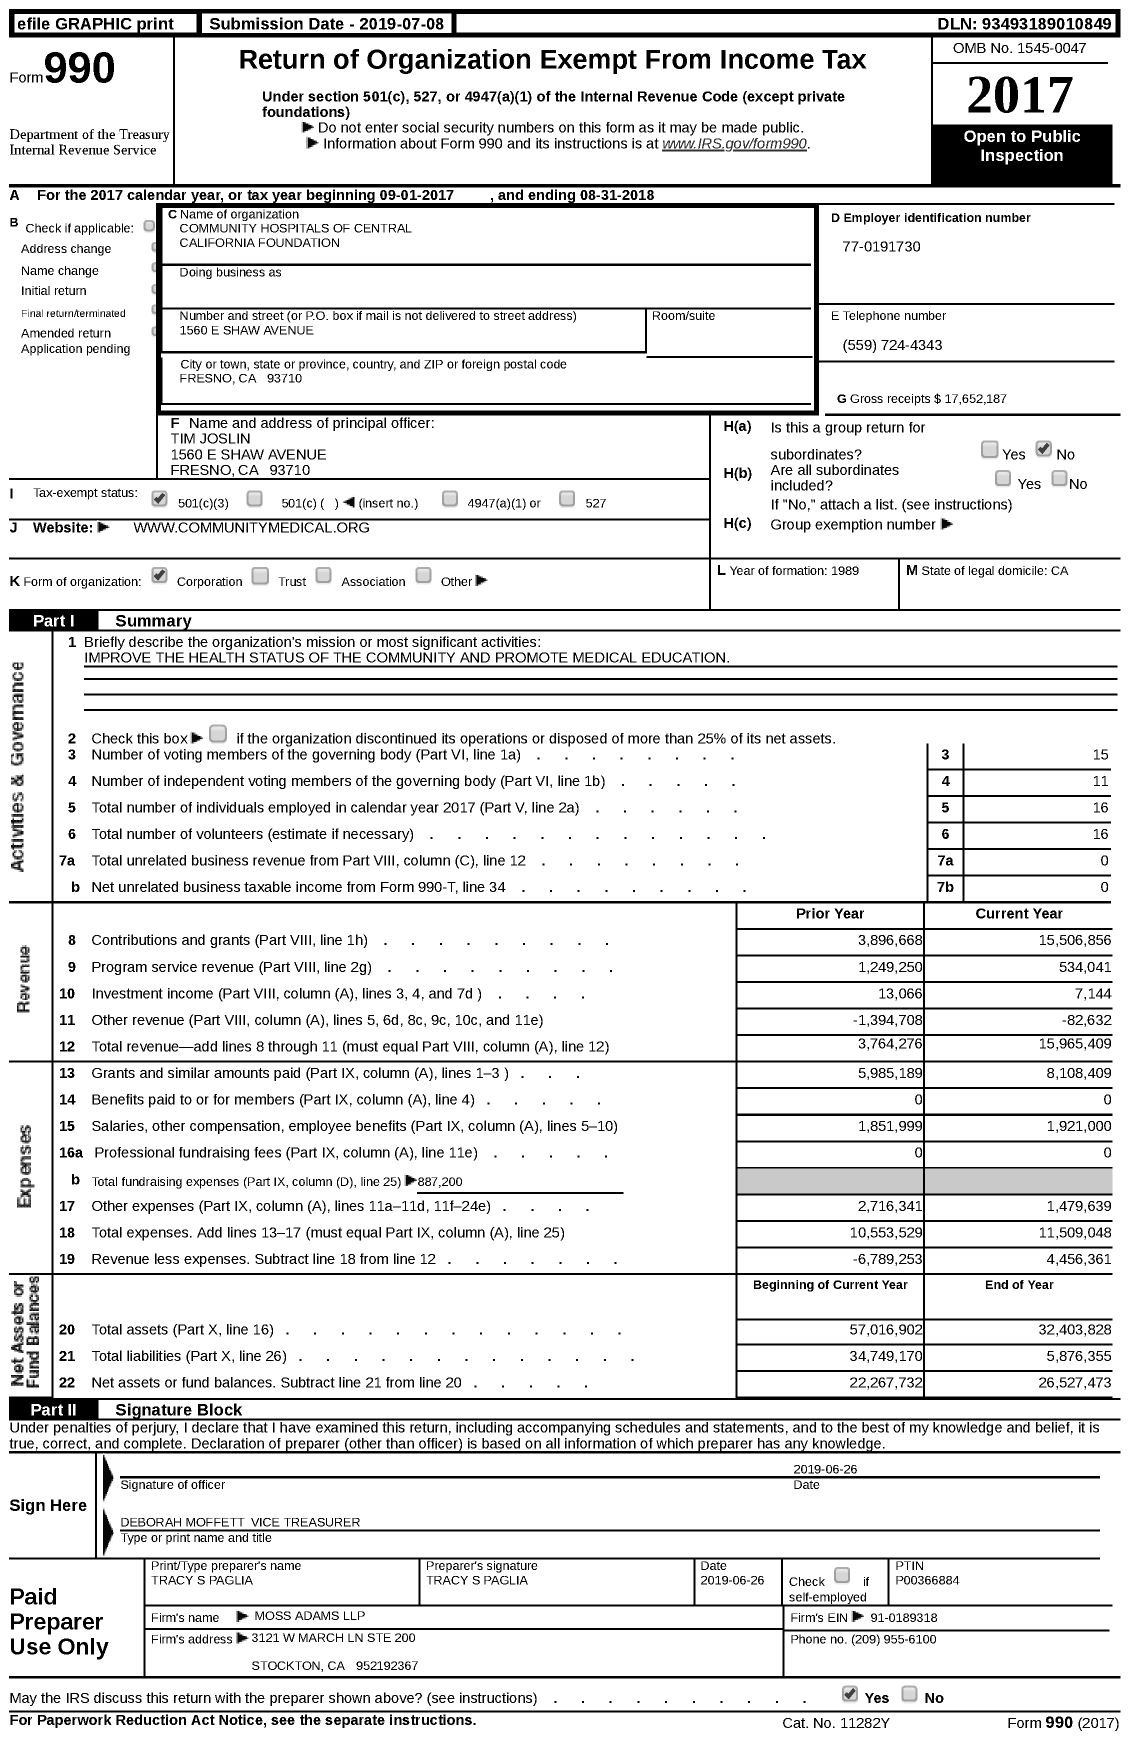 Image of first page of 2017 Form 990 for Community Hospital of Central California Foundation